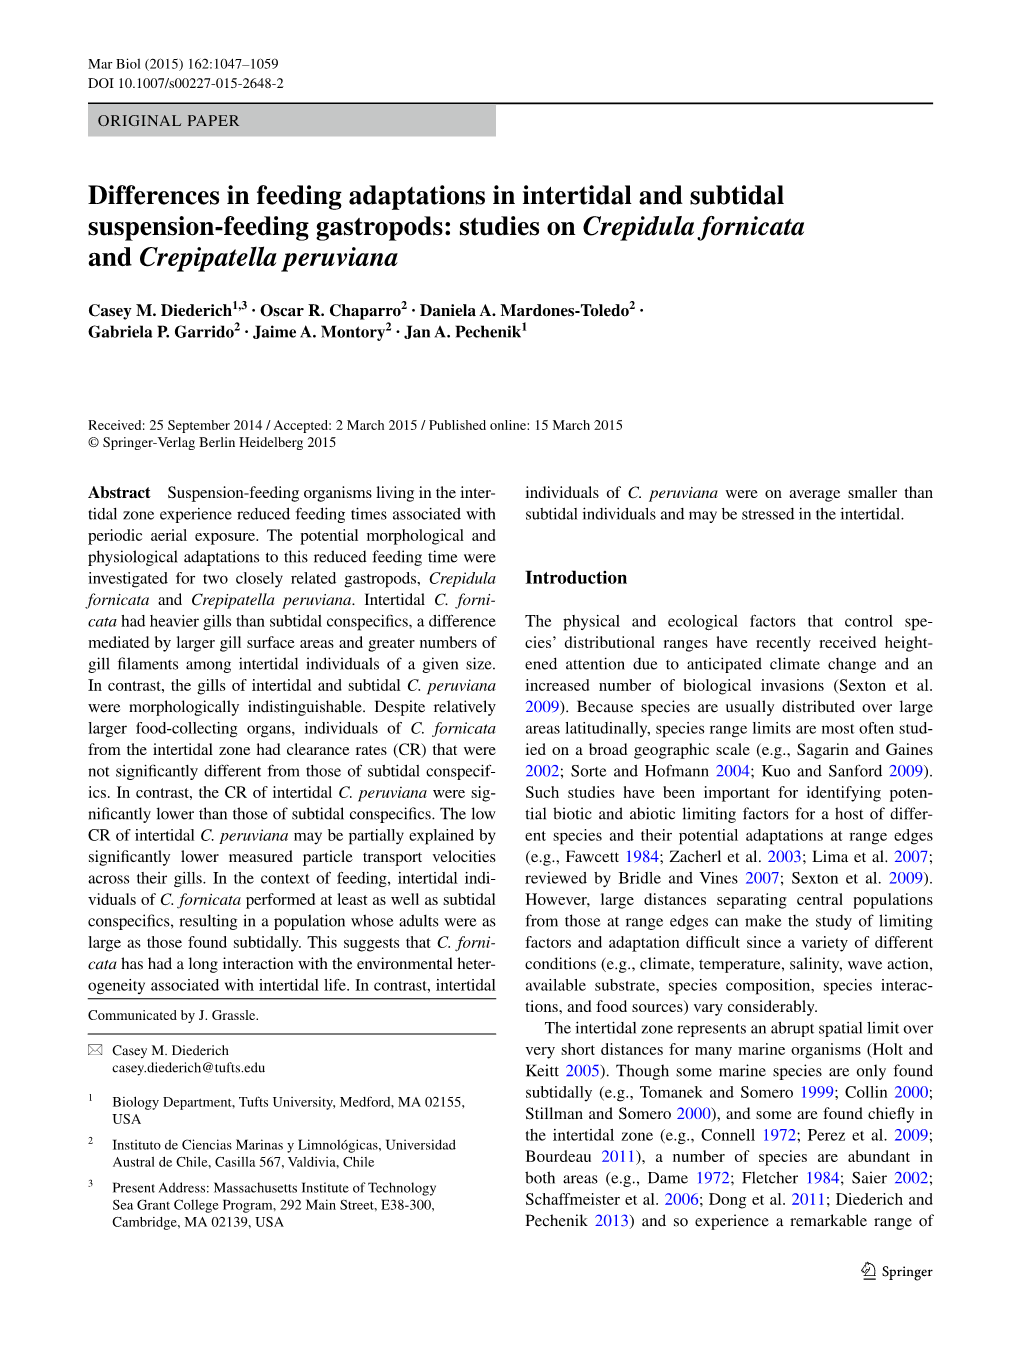 Differences in Feeding Adaptations in Intertidal and Subtidal Suspension‑Feeding Gastropods: Studies on Crepidula Fornicata An